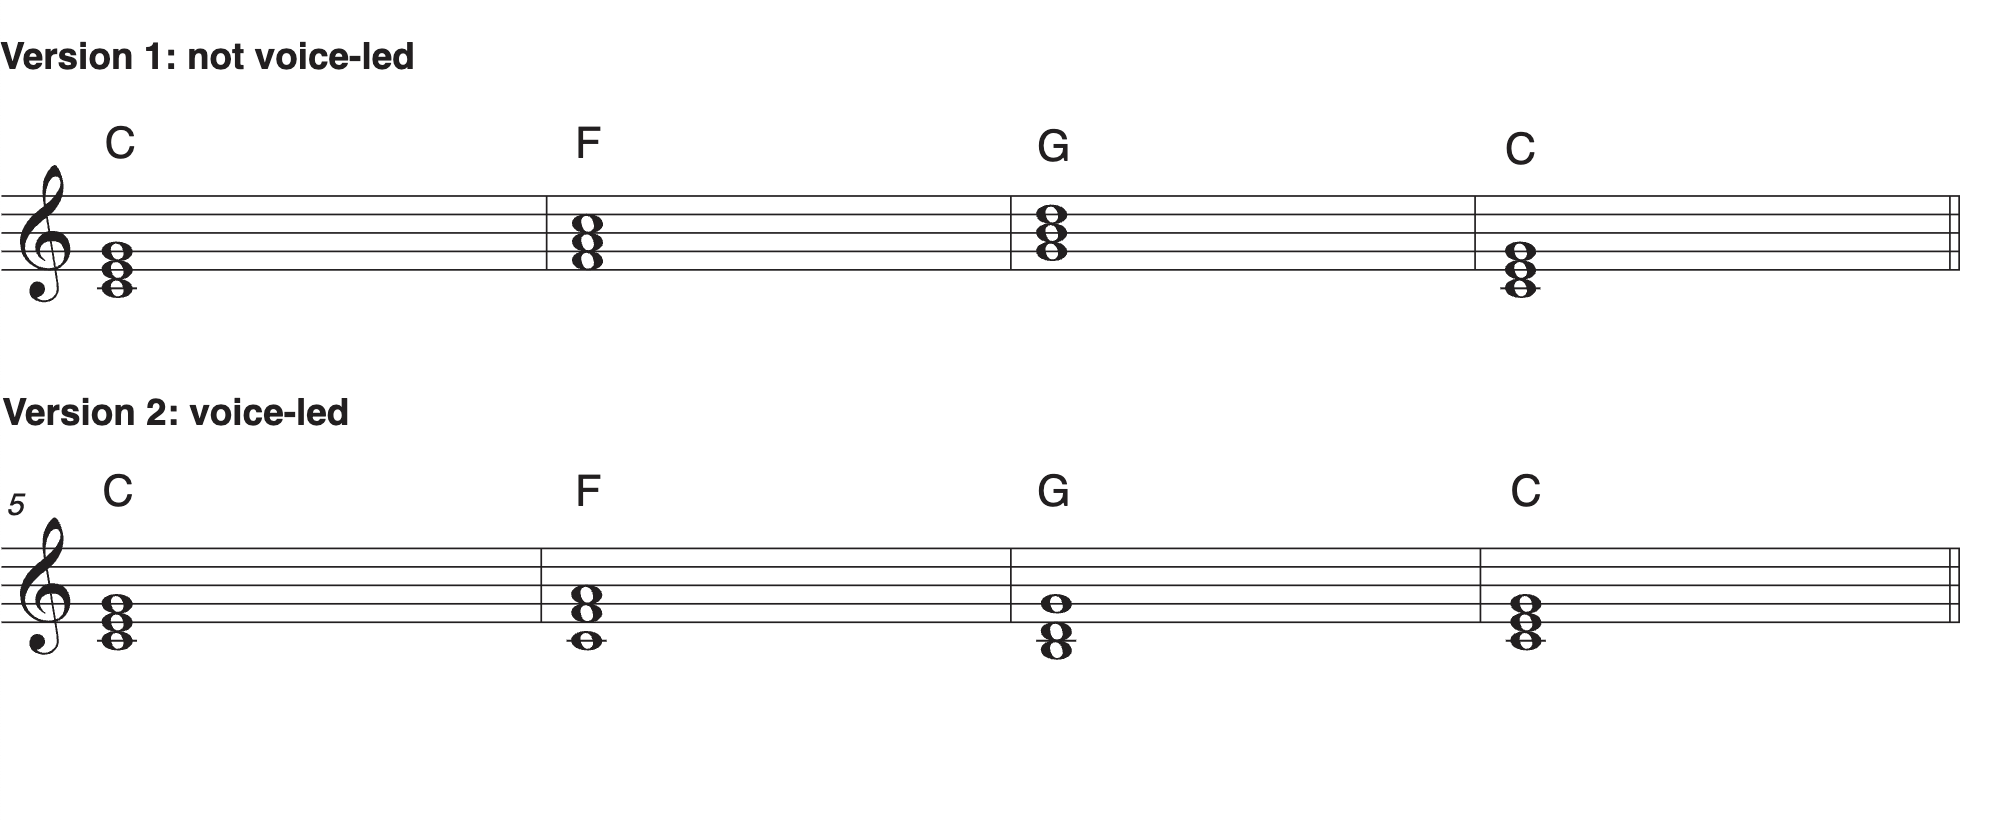 In this music notation example, we see a chord progression that is voice-led, and one that is NOT voice-led.